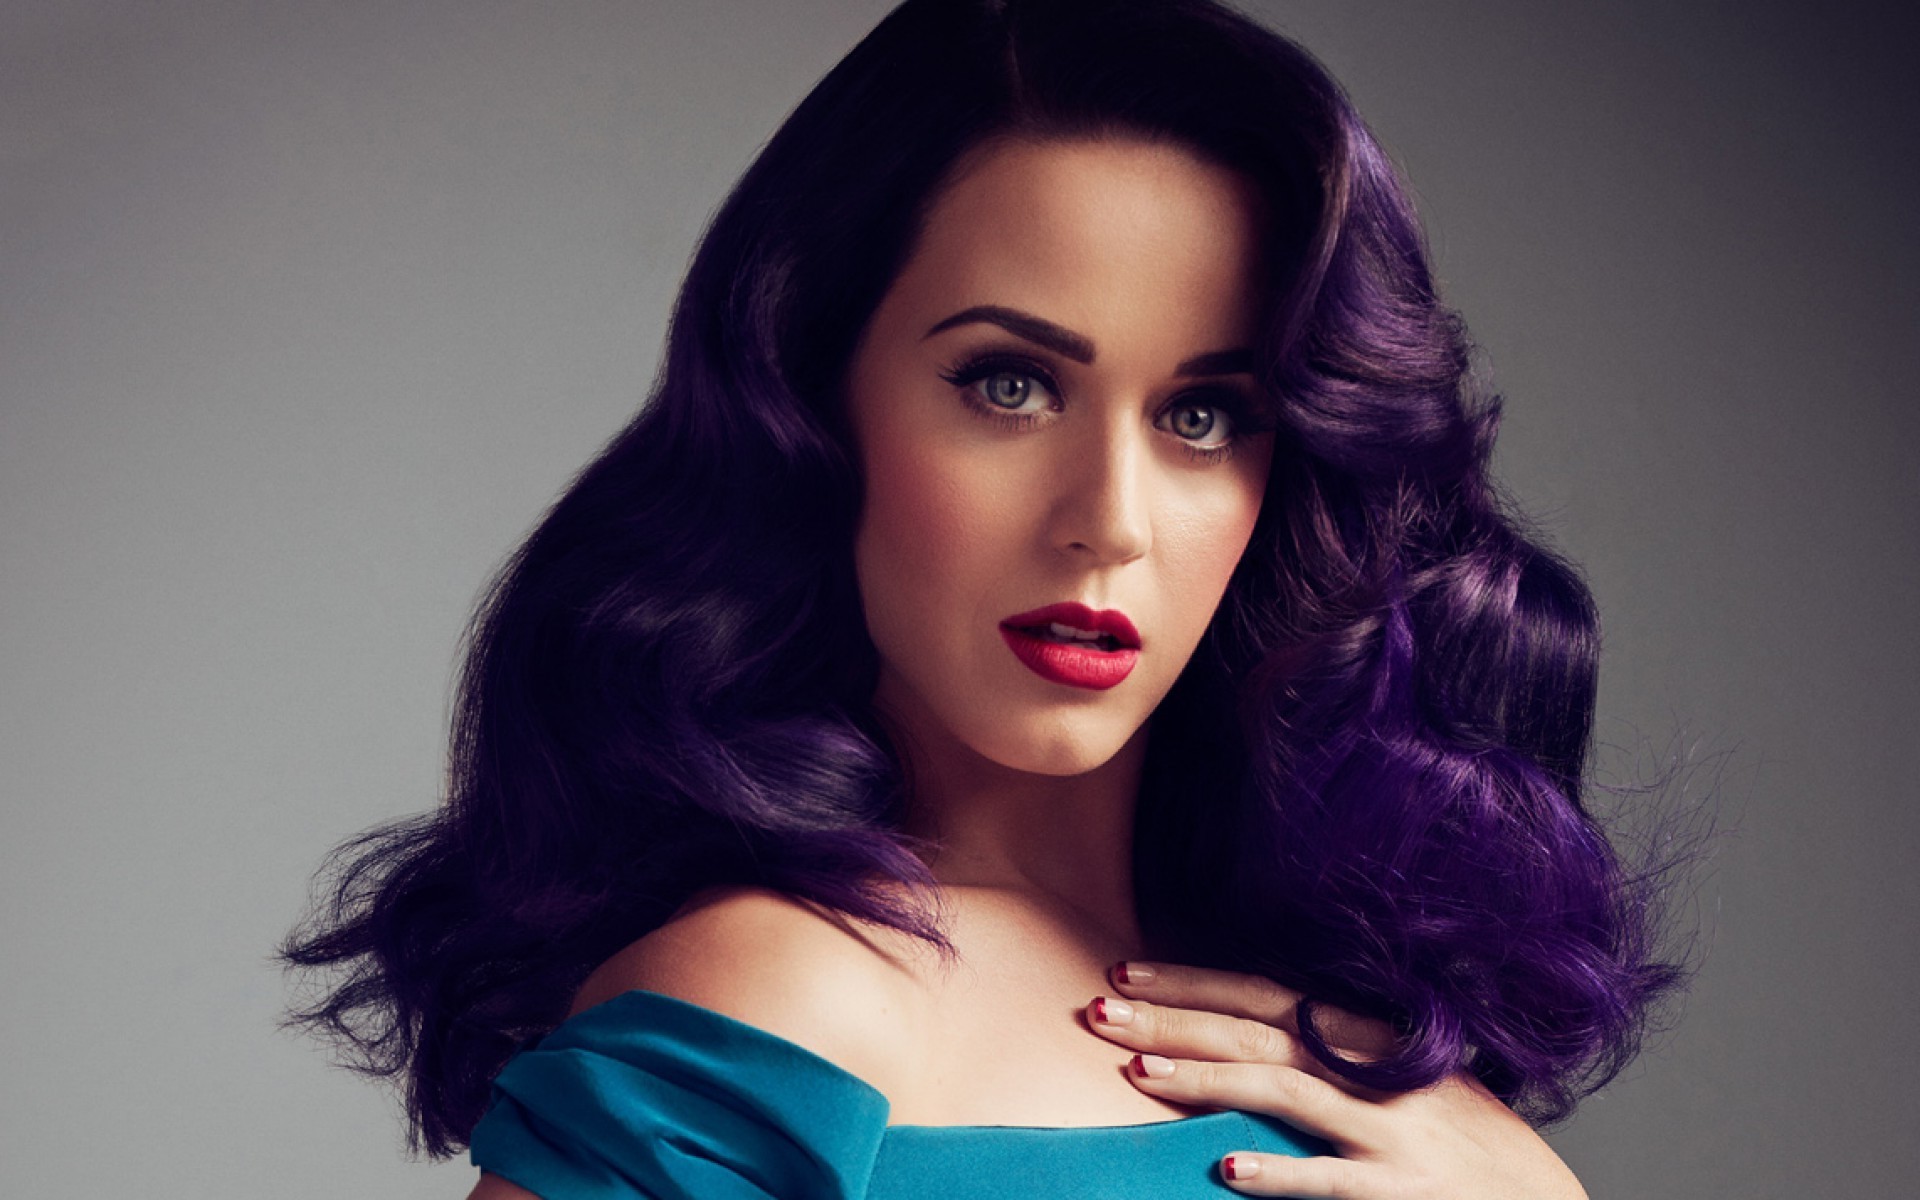 Wallpaper Celebrities Katy Perry Pictures To Pin